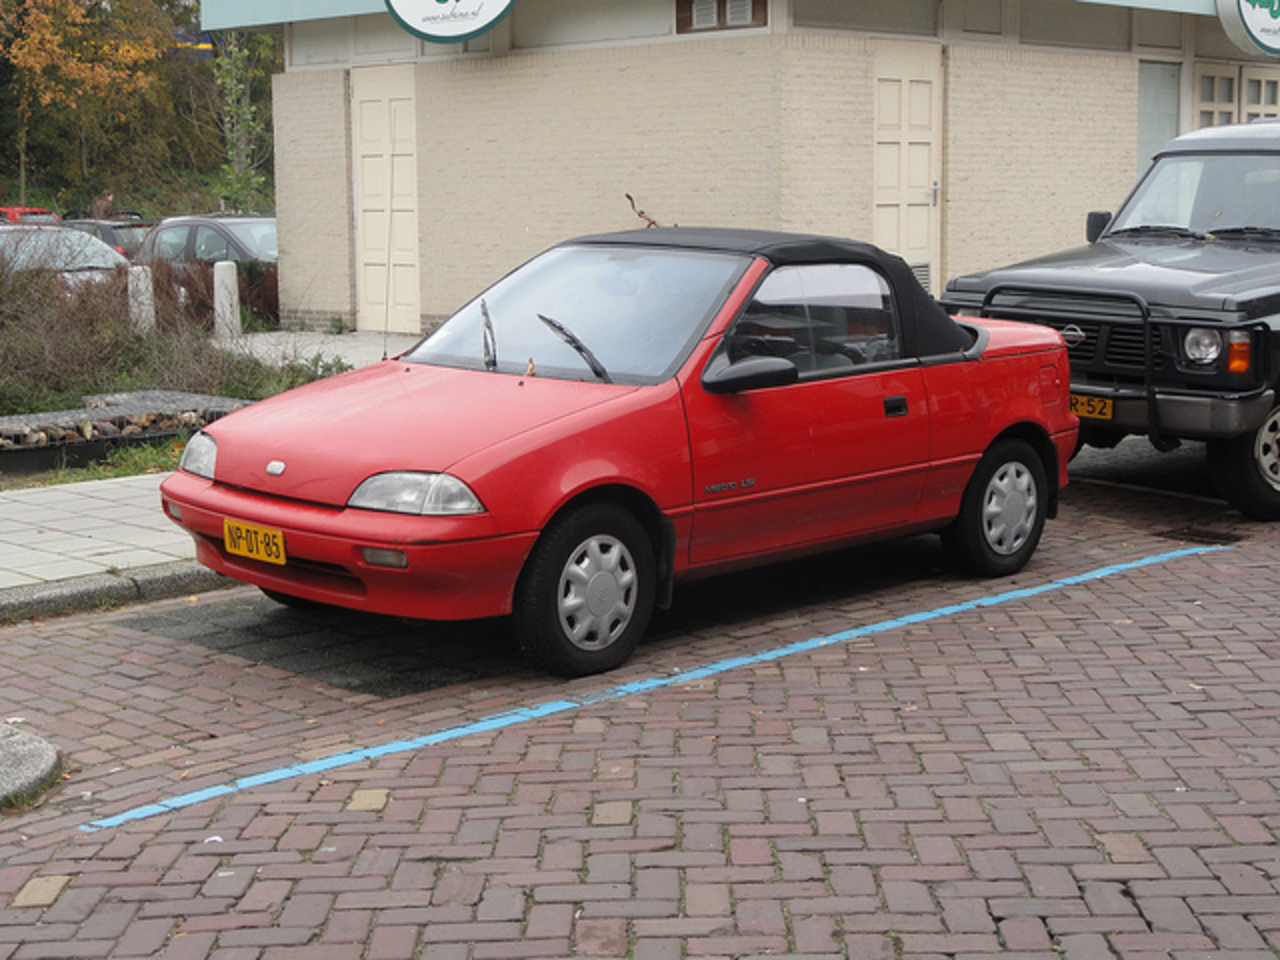 1990 Geo Metro Convertible (automatic) | Flickr - Photo Sharing!